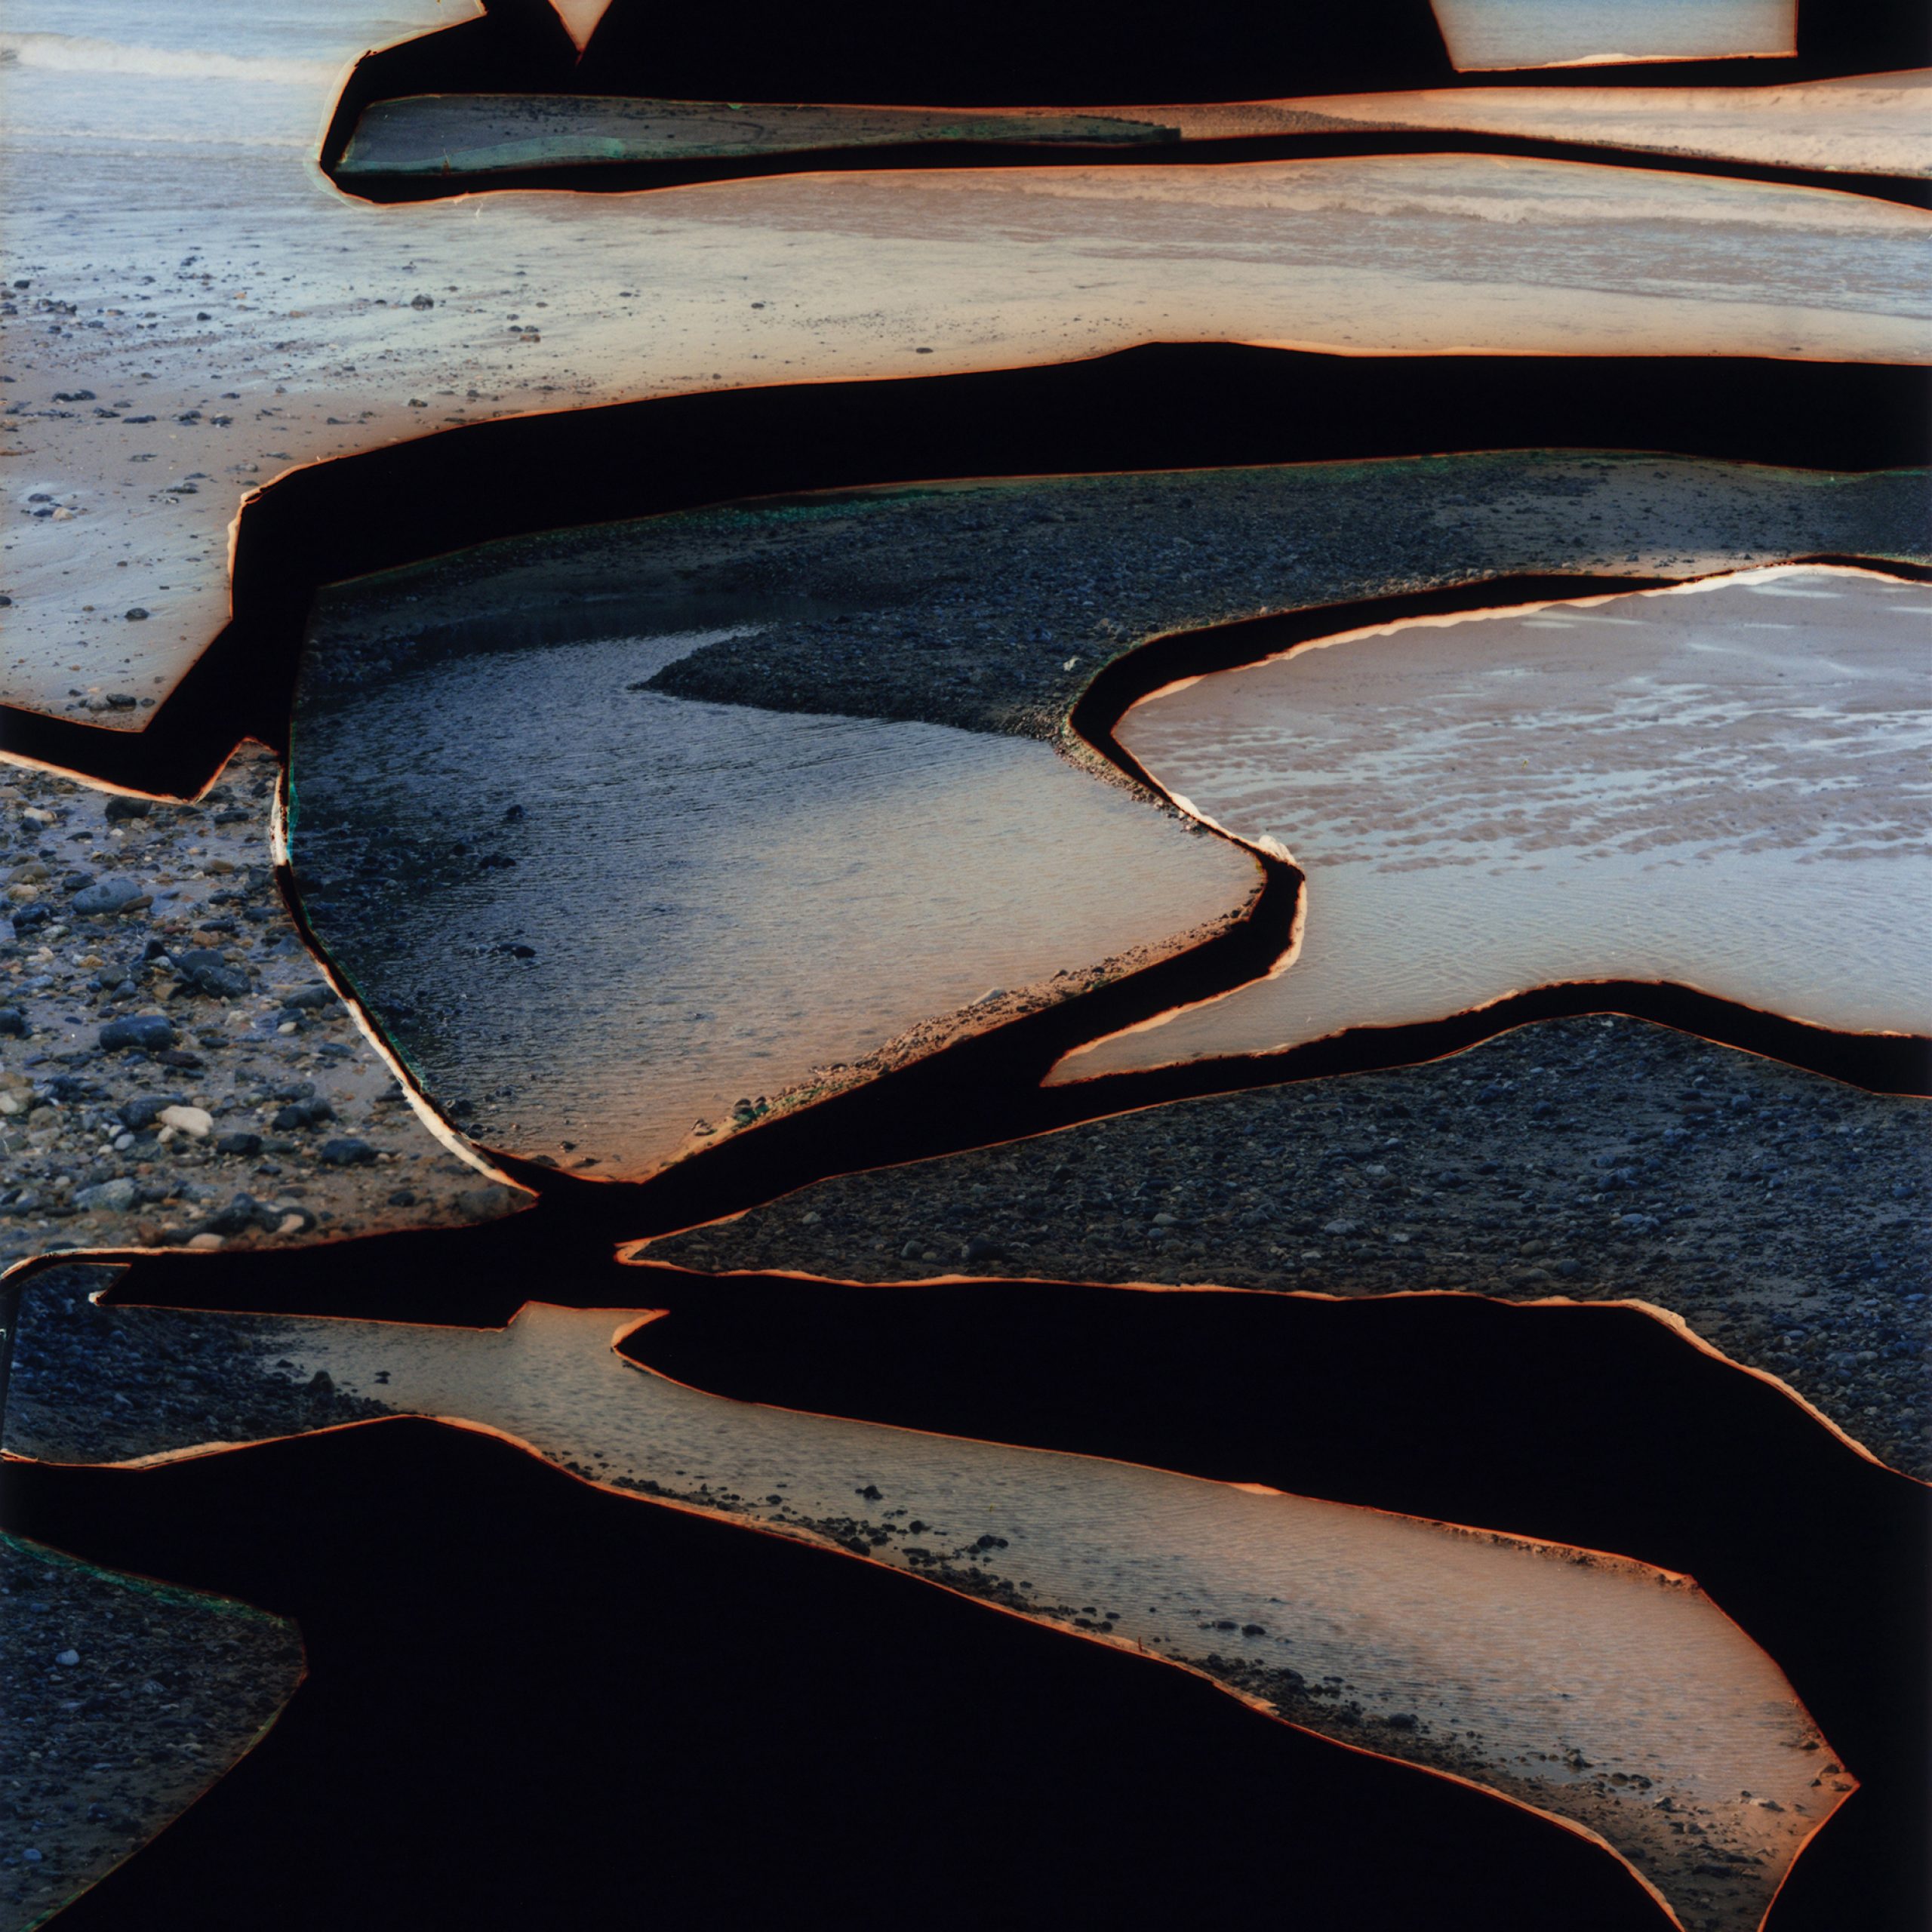 Dafna Talmor, From the Constructed Landscapes II Series [Detail], 2019. Courtesy of the Artist